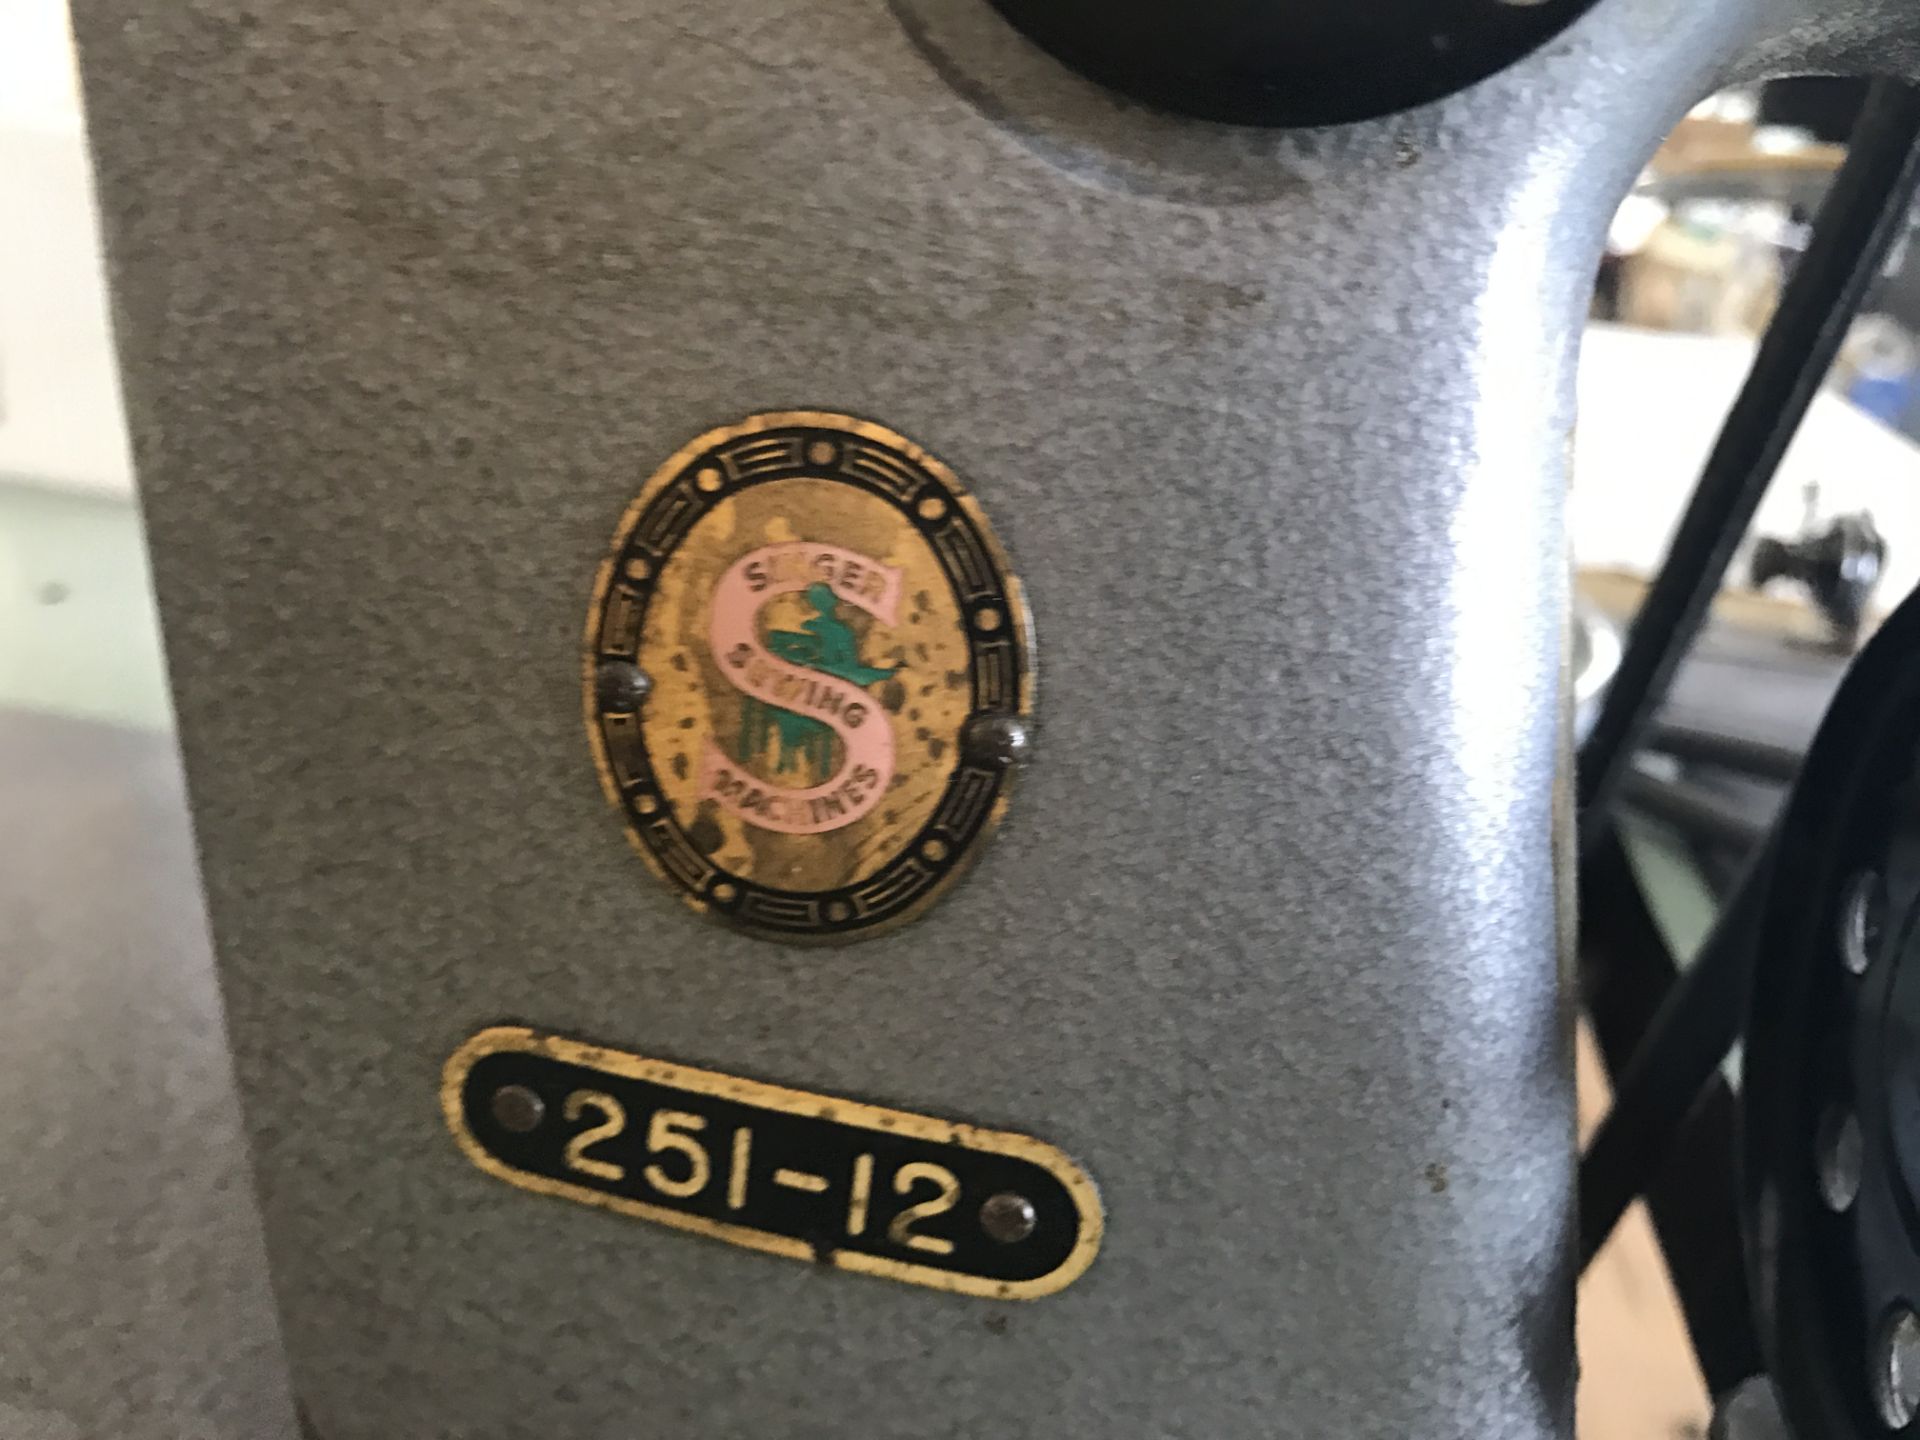 SINGER INDUSTRIAL SEWING MACHINE MOD. 251-12 - Image 2 of 4